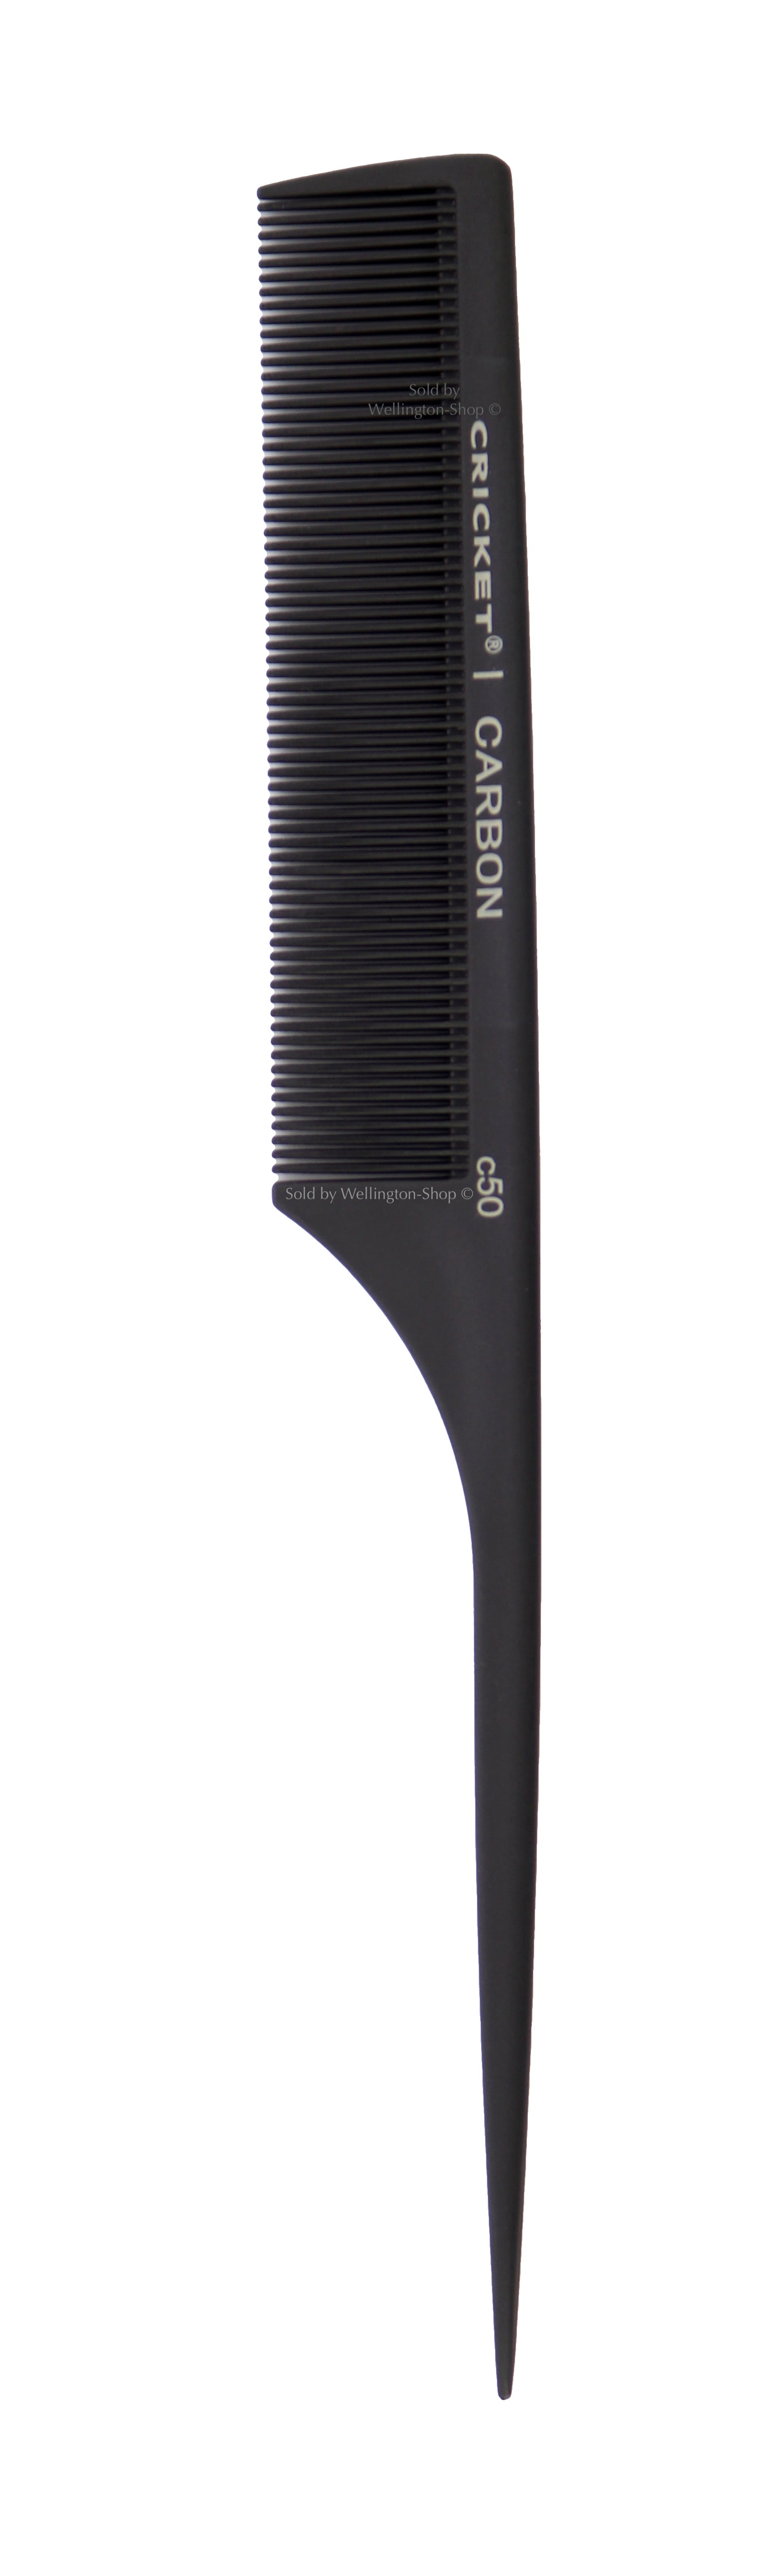 Allegro Combs XL Pintail Rat Tail Combs Parting Combs Metal Tail Foiling  Combs Black & White 2 Pc. 